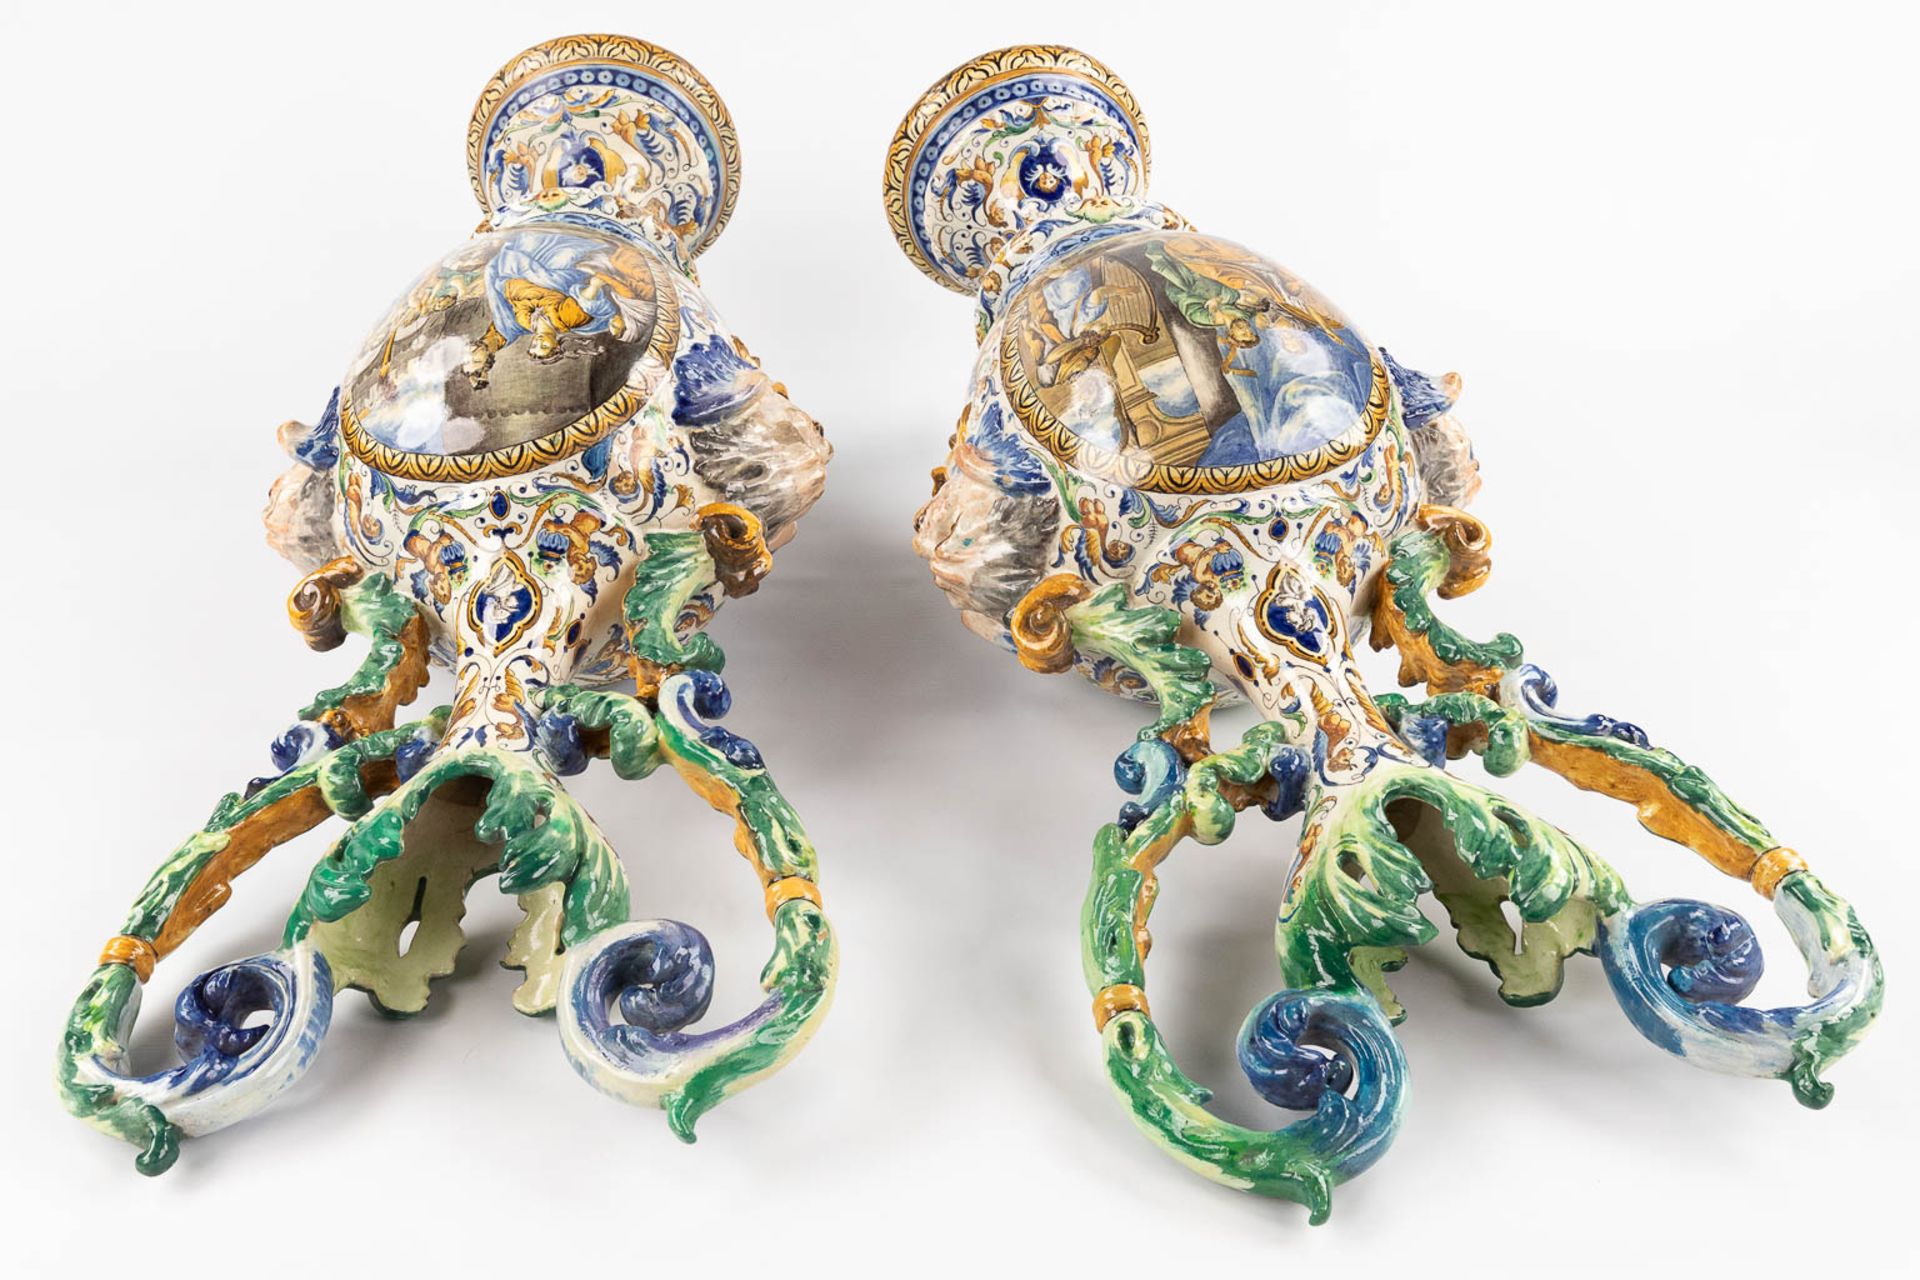 A pair of large vases, Italian Renaissance style, glazed faience. 20th C. (D:45 x W:45 x H:205 cm) - Image 10 of 31